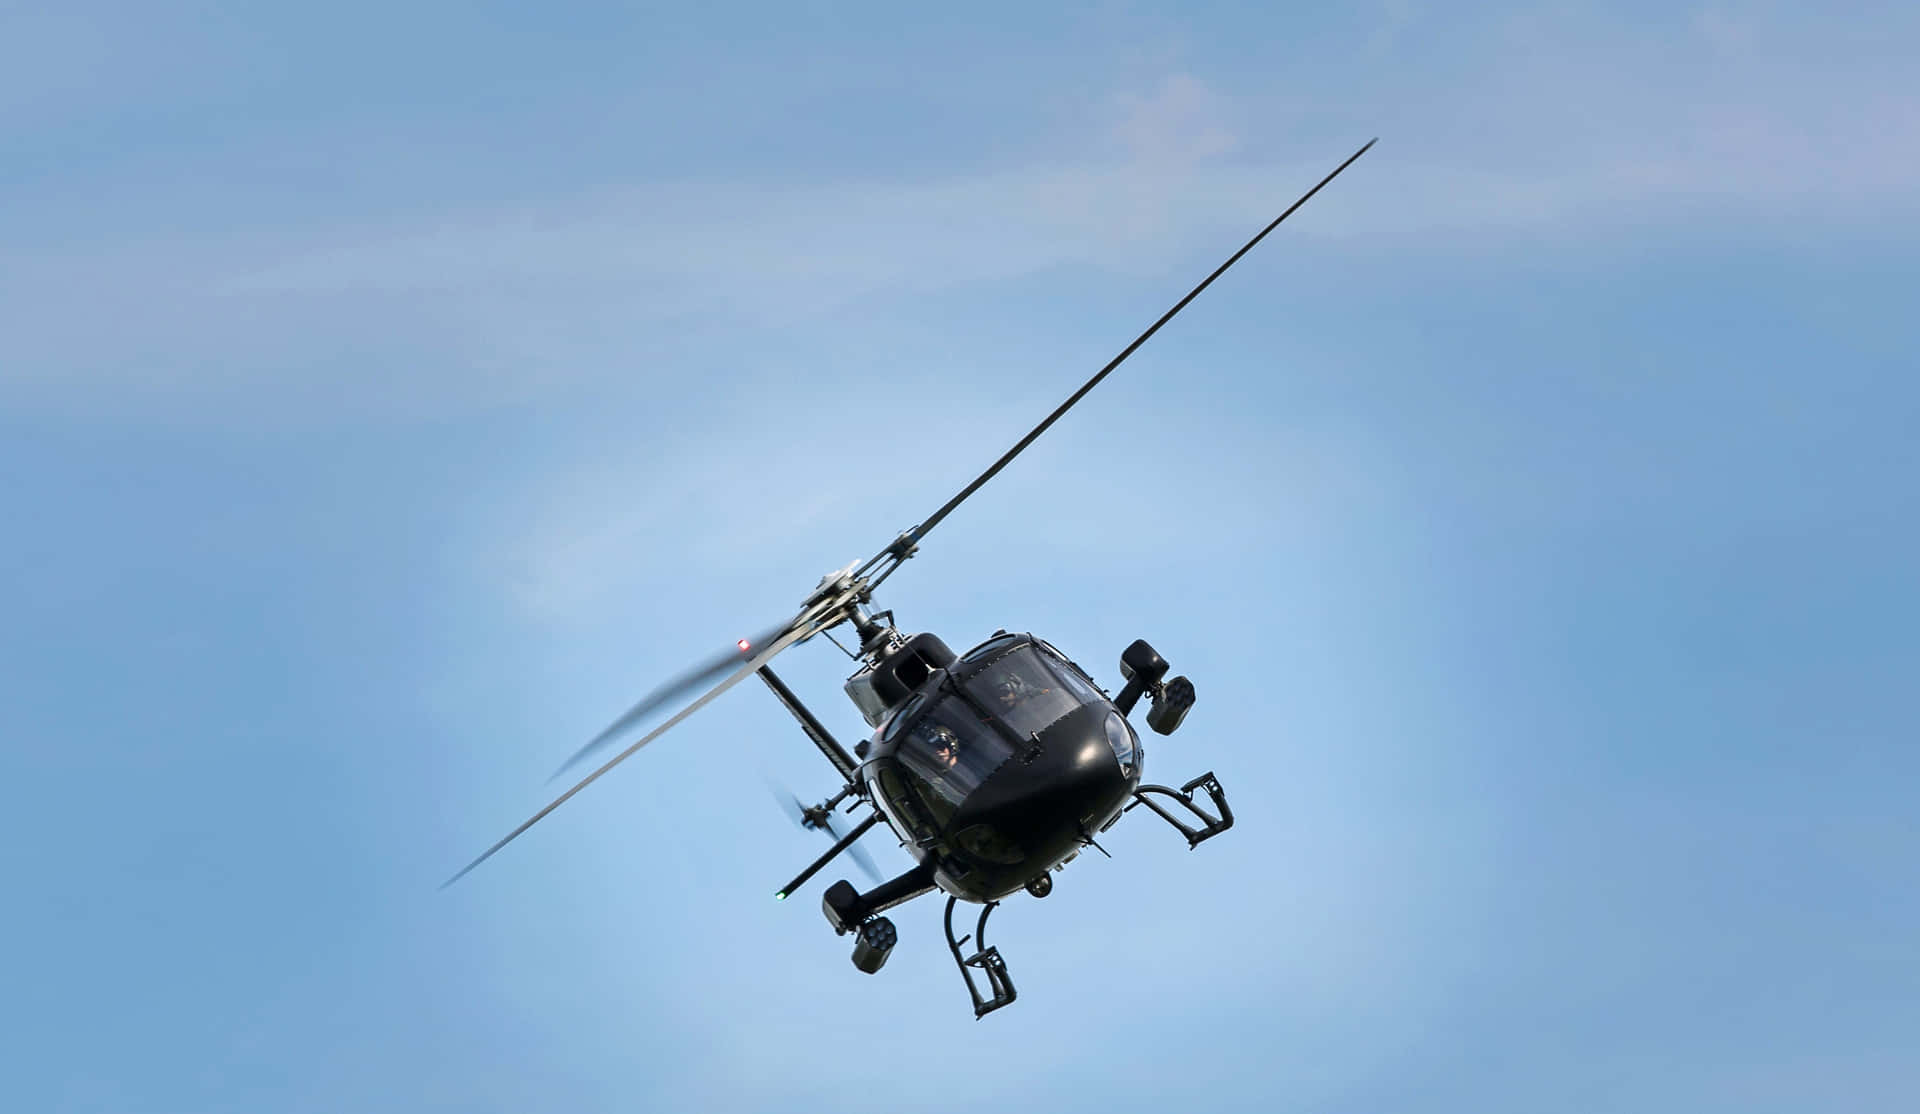 Stunning Helicopter in Flight